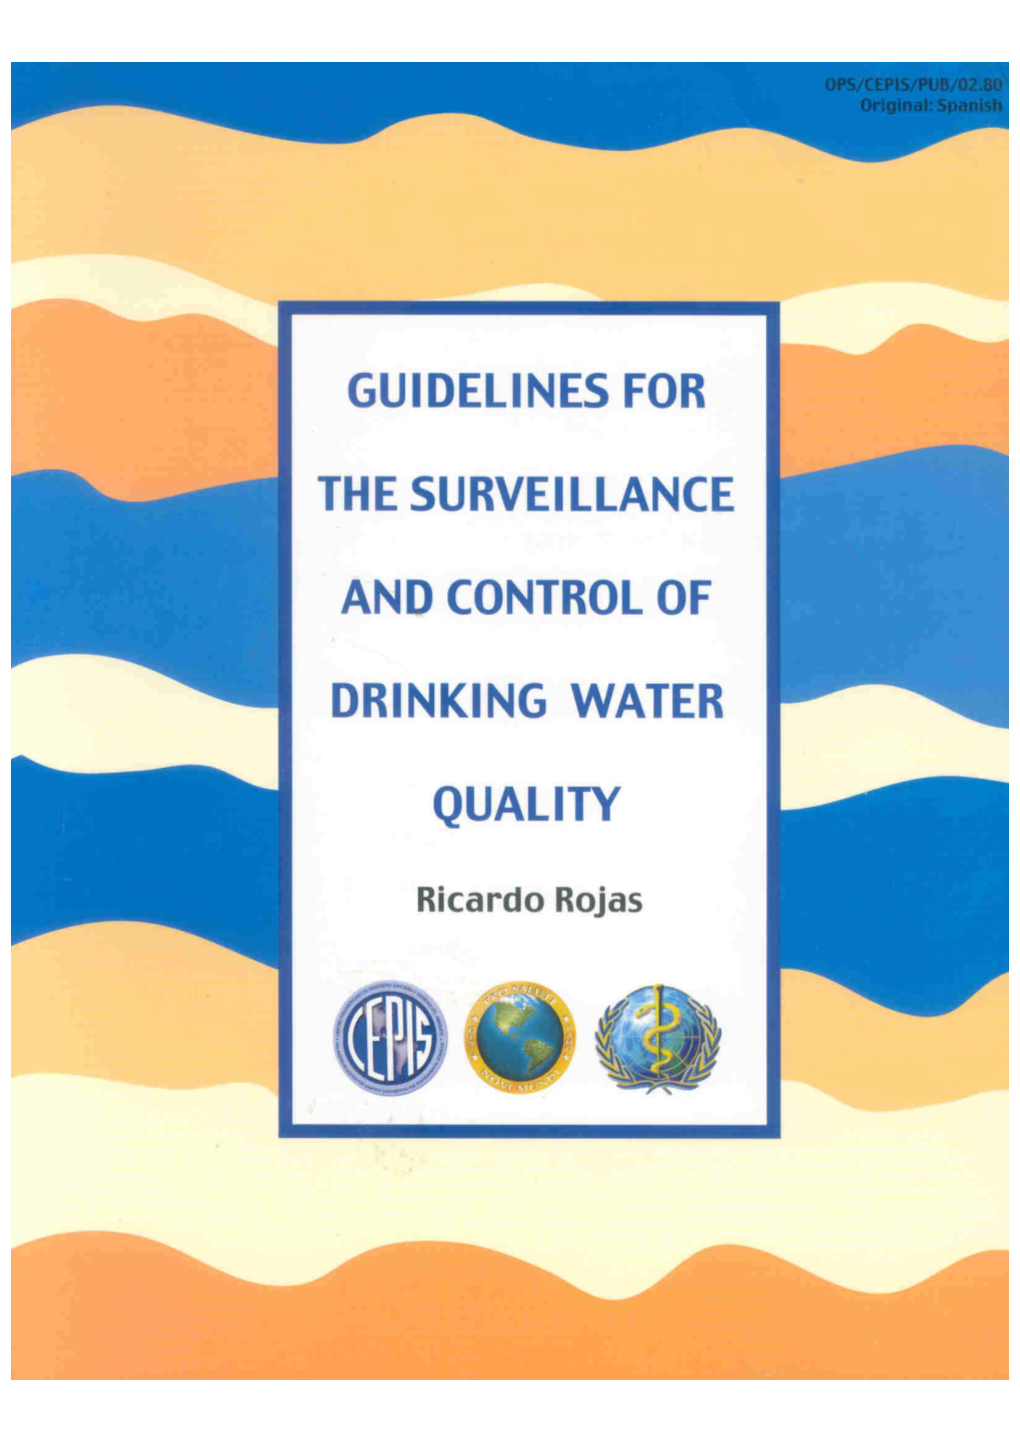 Guidelines for the Surveillance and Control of Drinking Water Quality